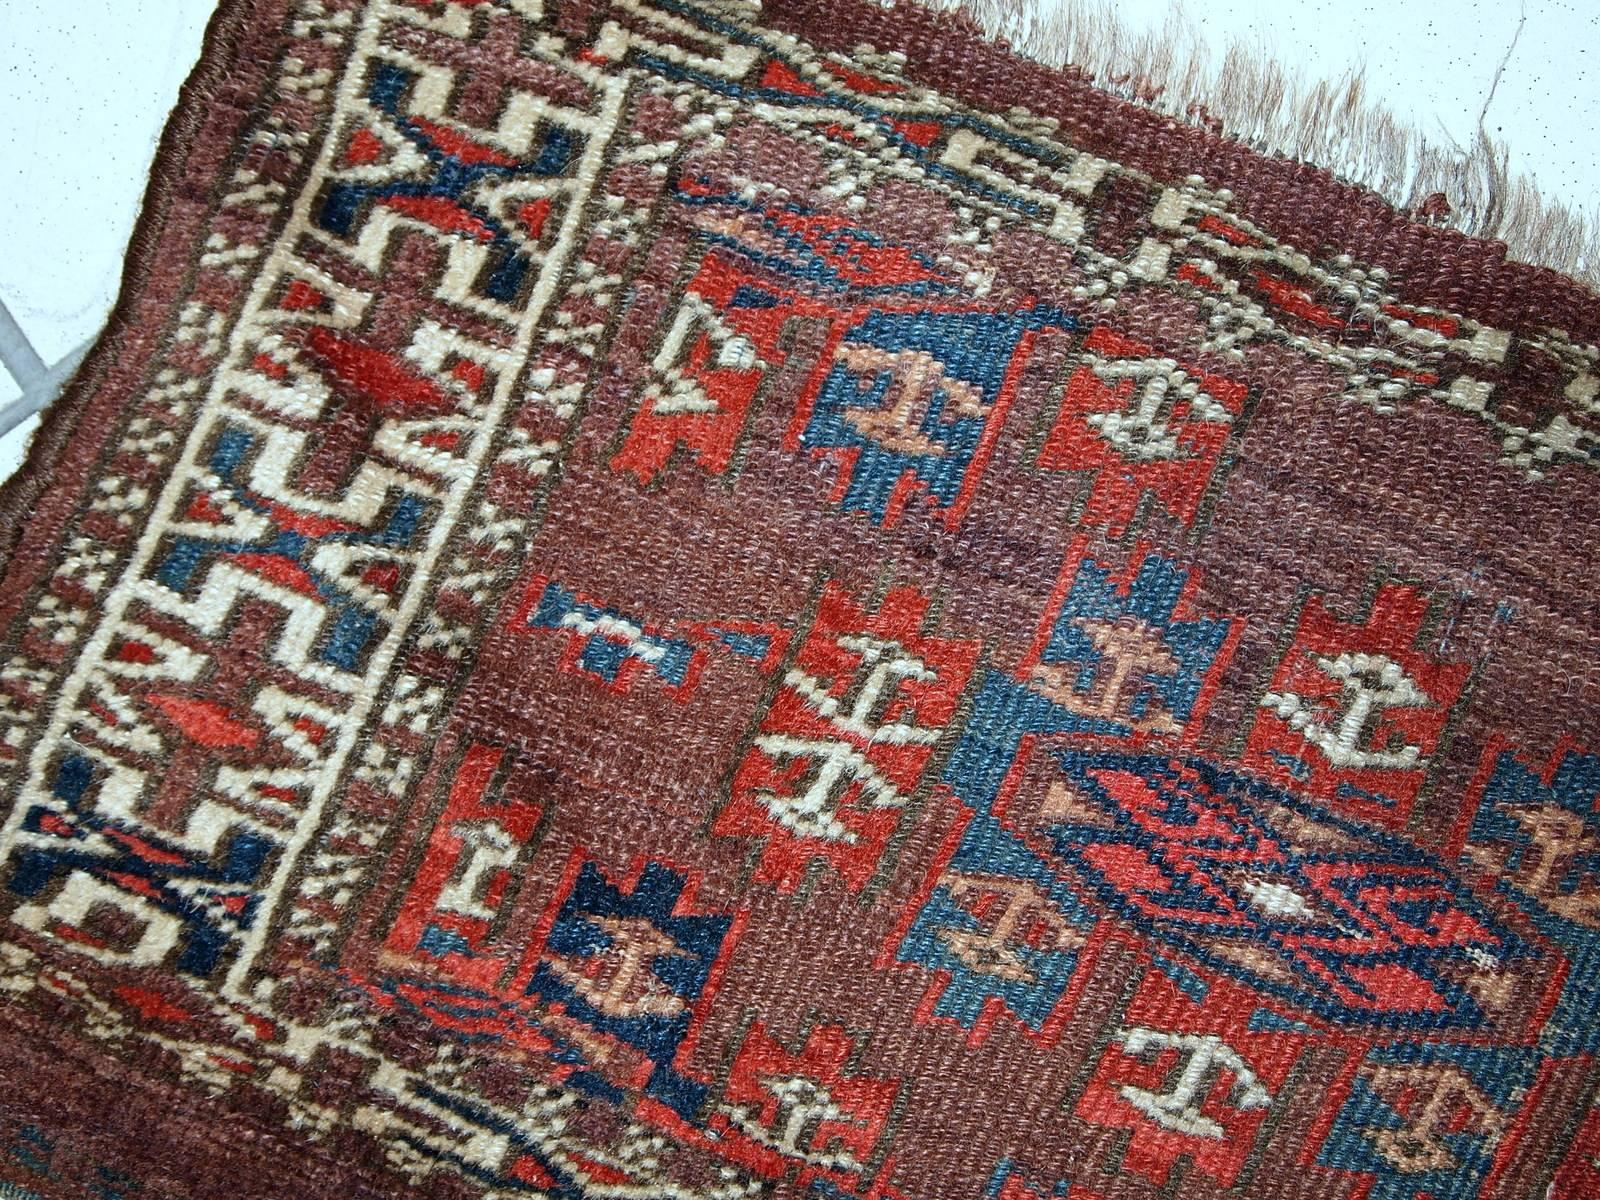 Handmade antique collectible Turkoman Yomud rug in deep burgundy color with Classic design. Little anchors in brown and beige shades are spread around the rug randomly. Beige and navy blue shades represents some tribal design on it. Beige border